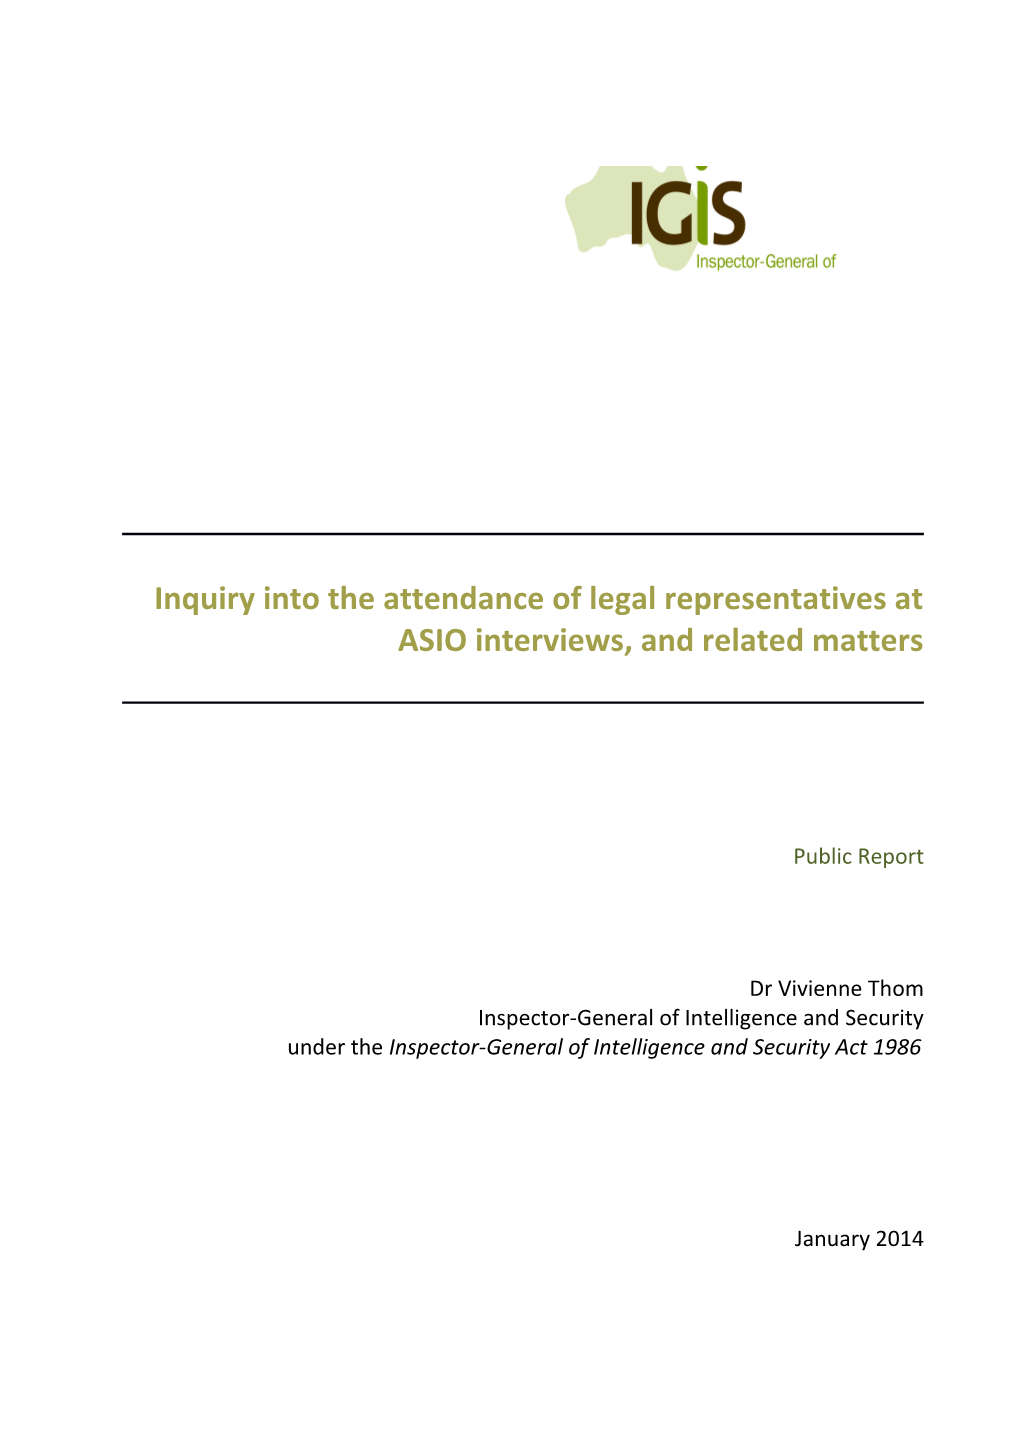 Inquiry Into the Attendance of Legal Representatives at ASIO Interviews, and Related Matters